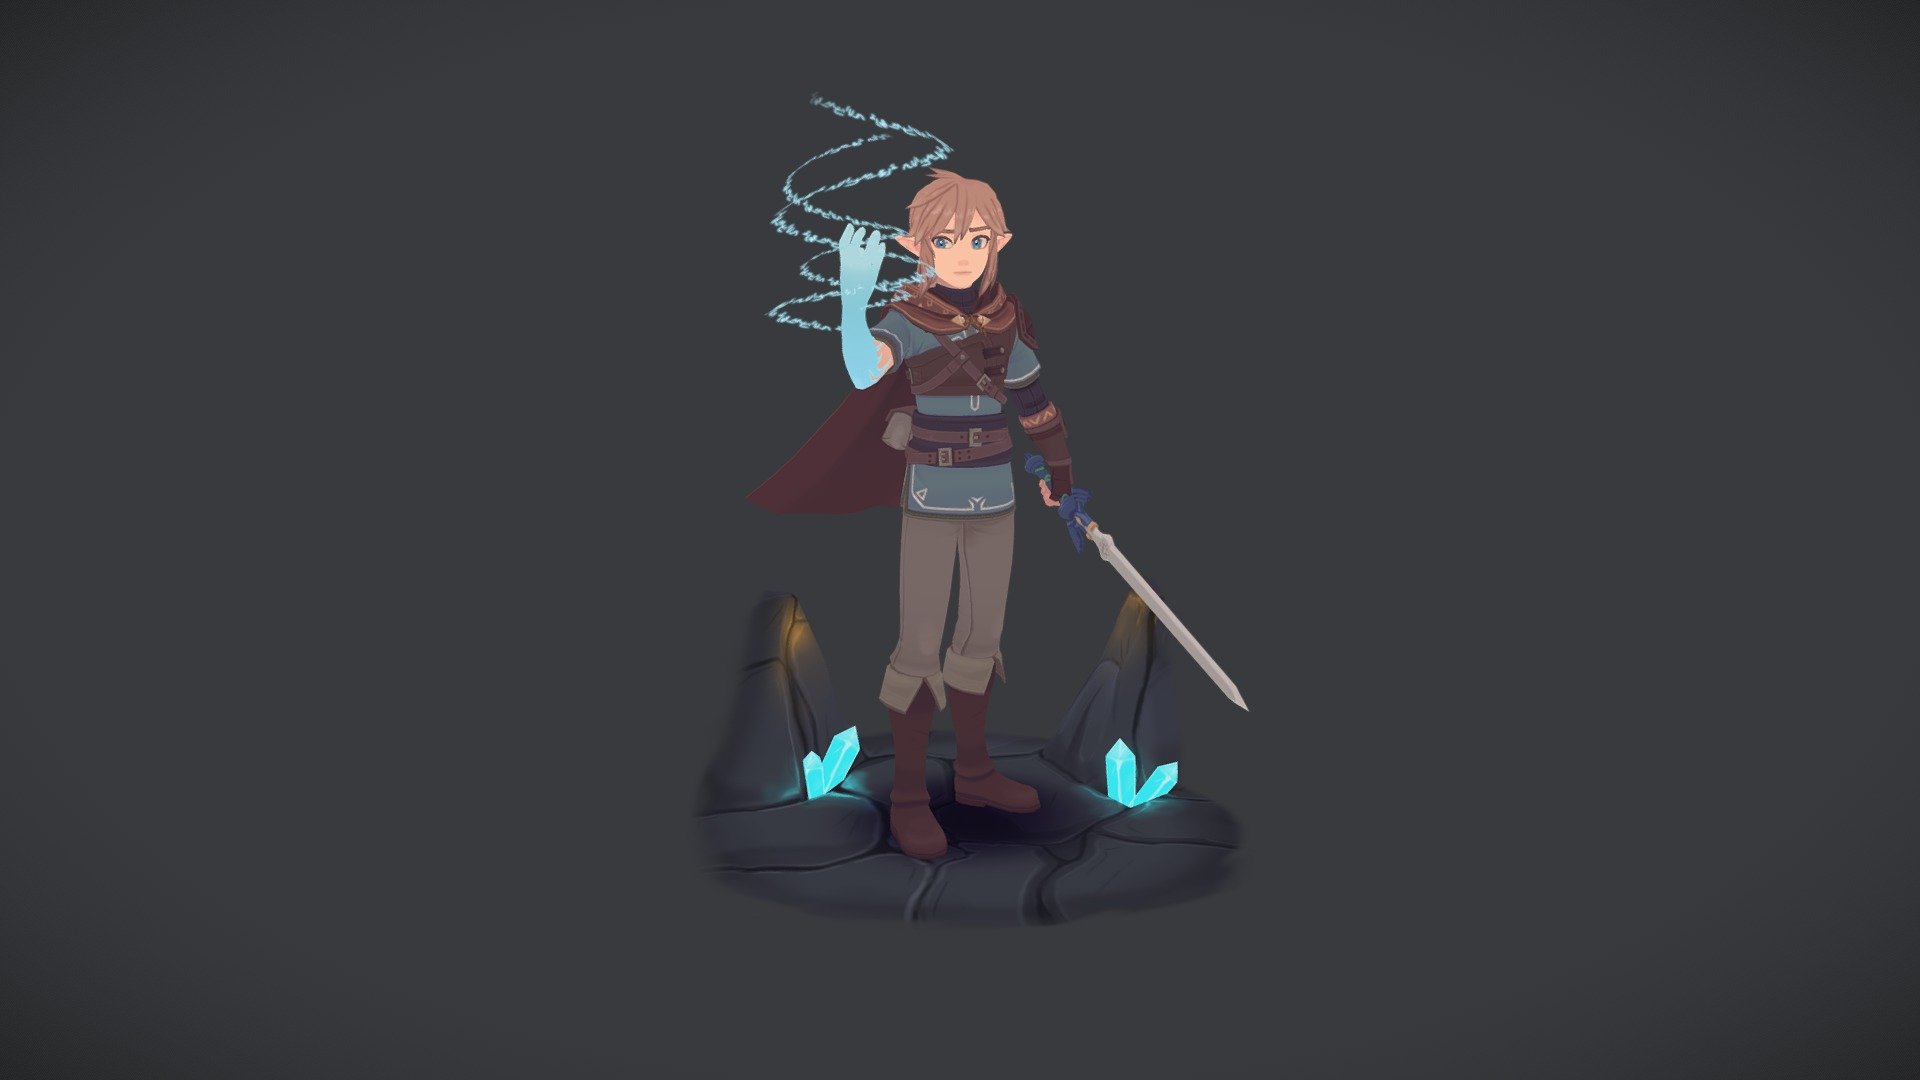 Can never resist making Zelda fan art haha. Decided to make a Link to match the Zelda model I made earlier :) - Link - Breath Of The Wild - 3D model by theStoff 3d model